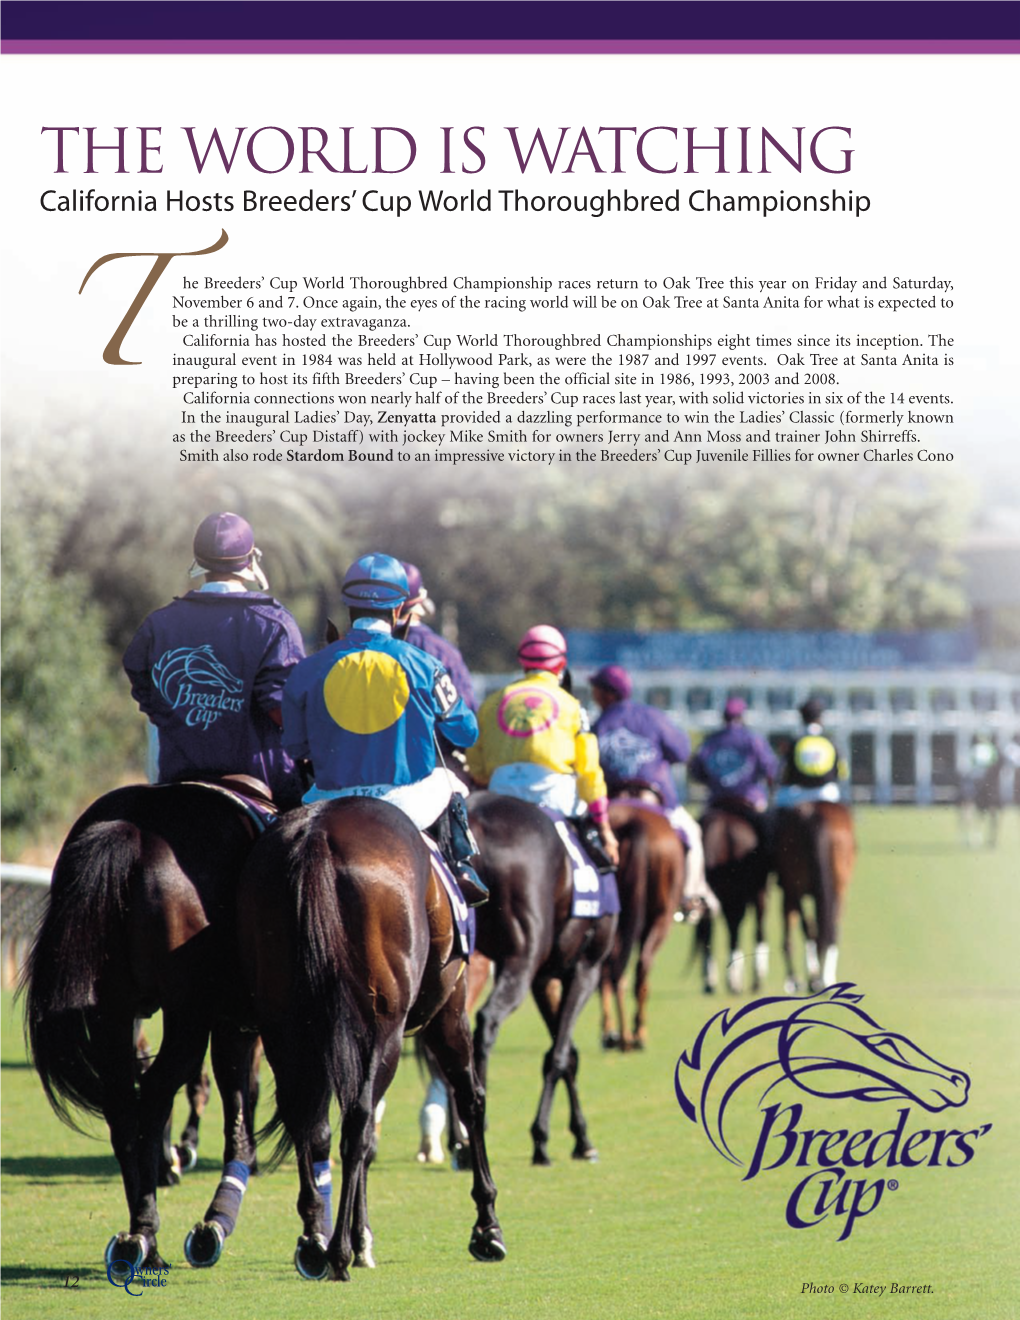 The World Is Watching California Hosts Breeders’ Cup World Thoroughbred Championship